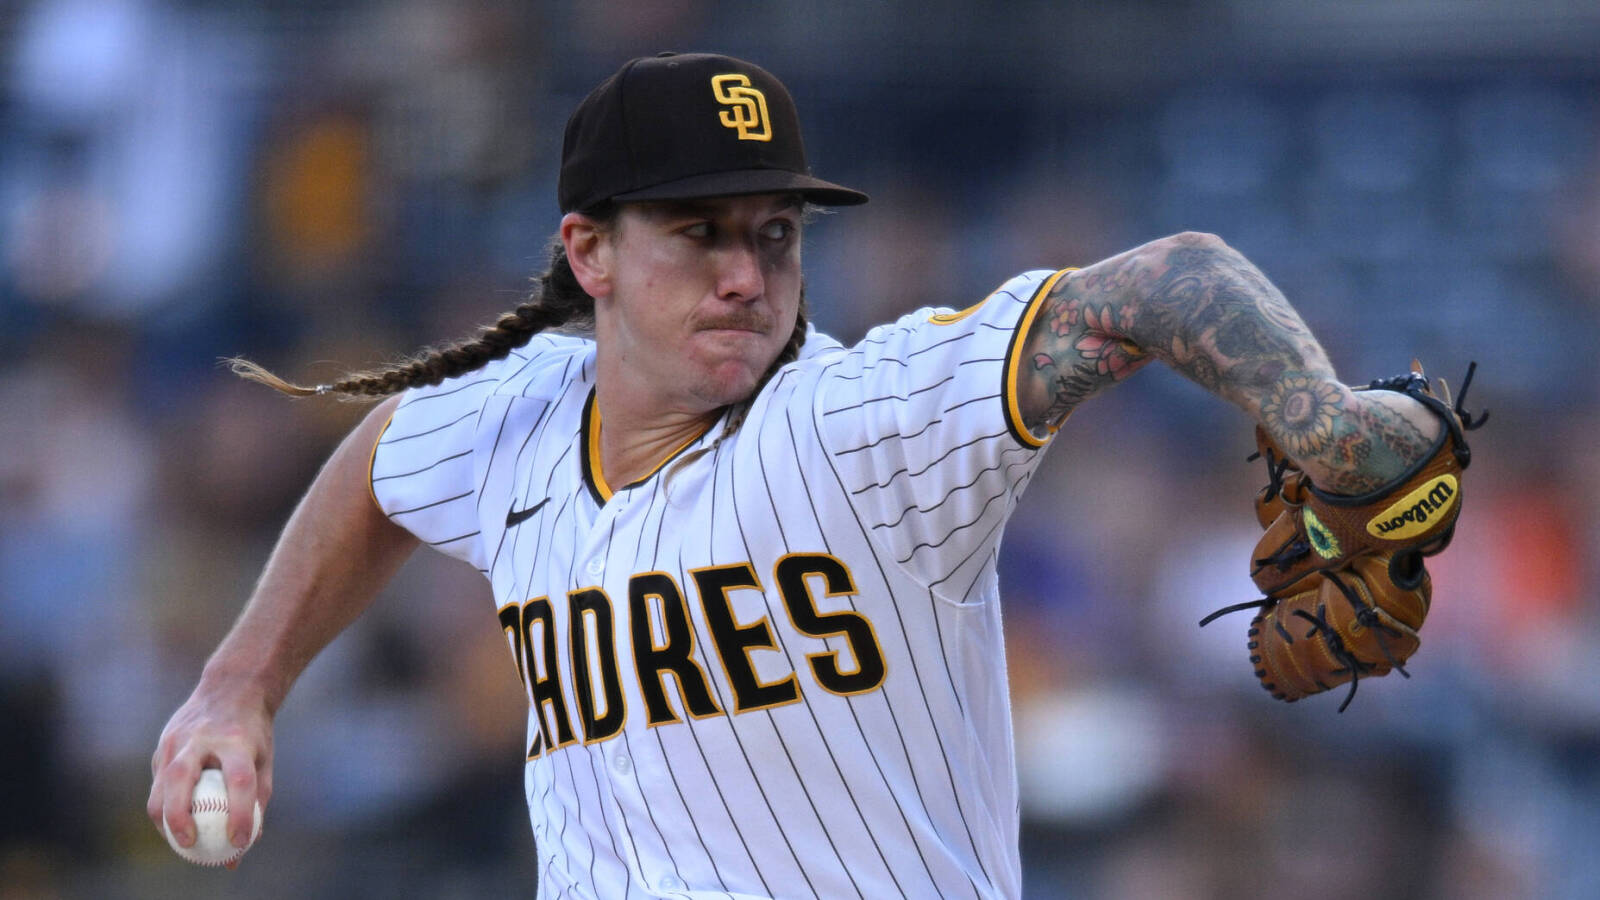 Mike Clevinger rocked a wild hairstyle during latest start | Yardbarker